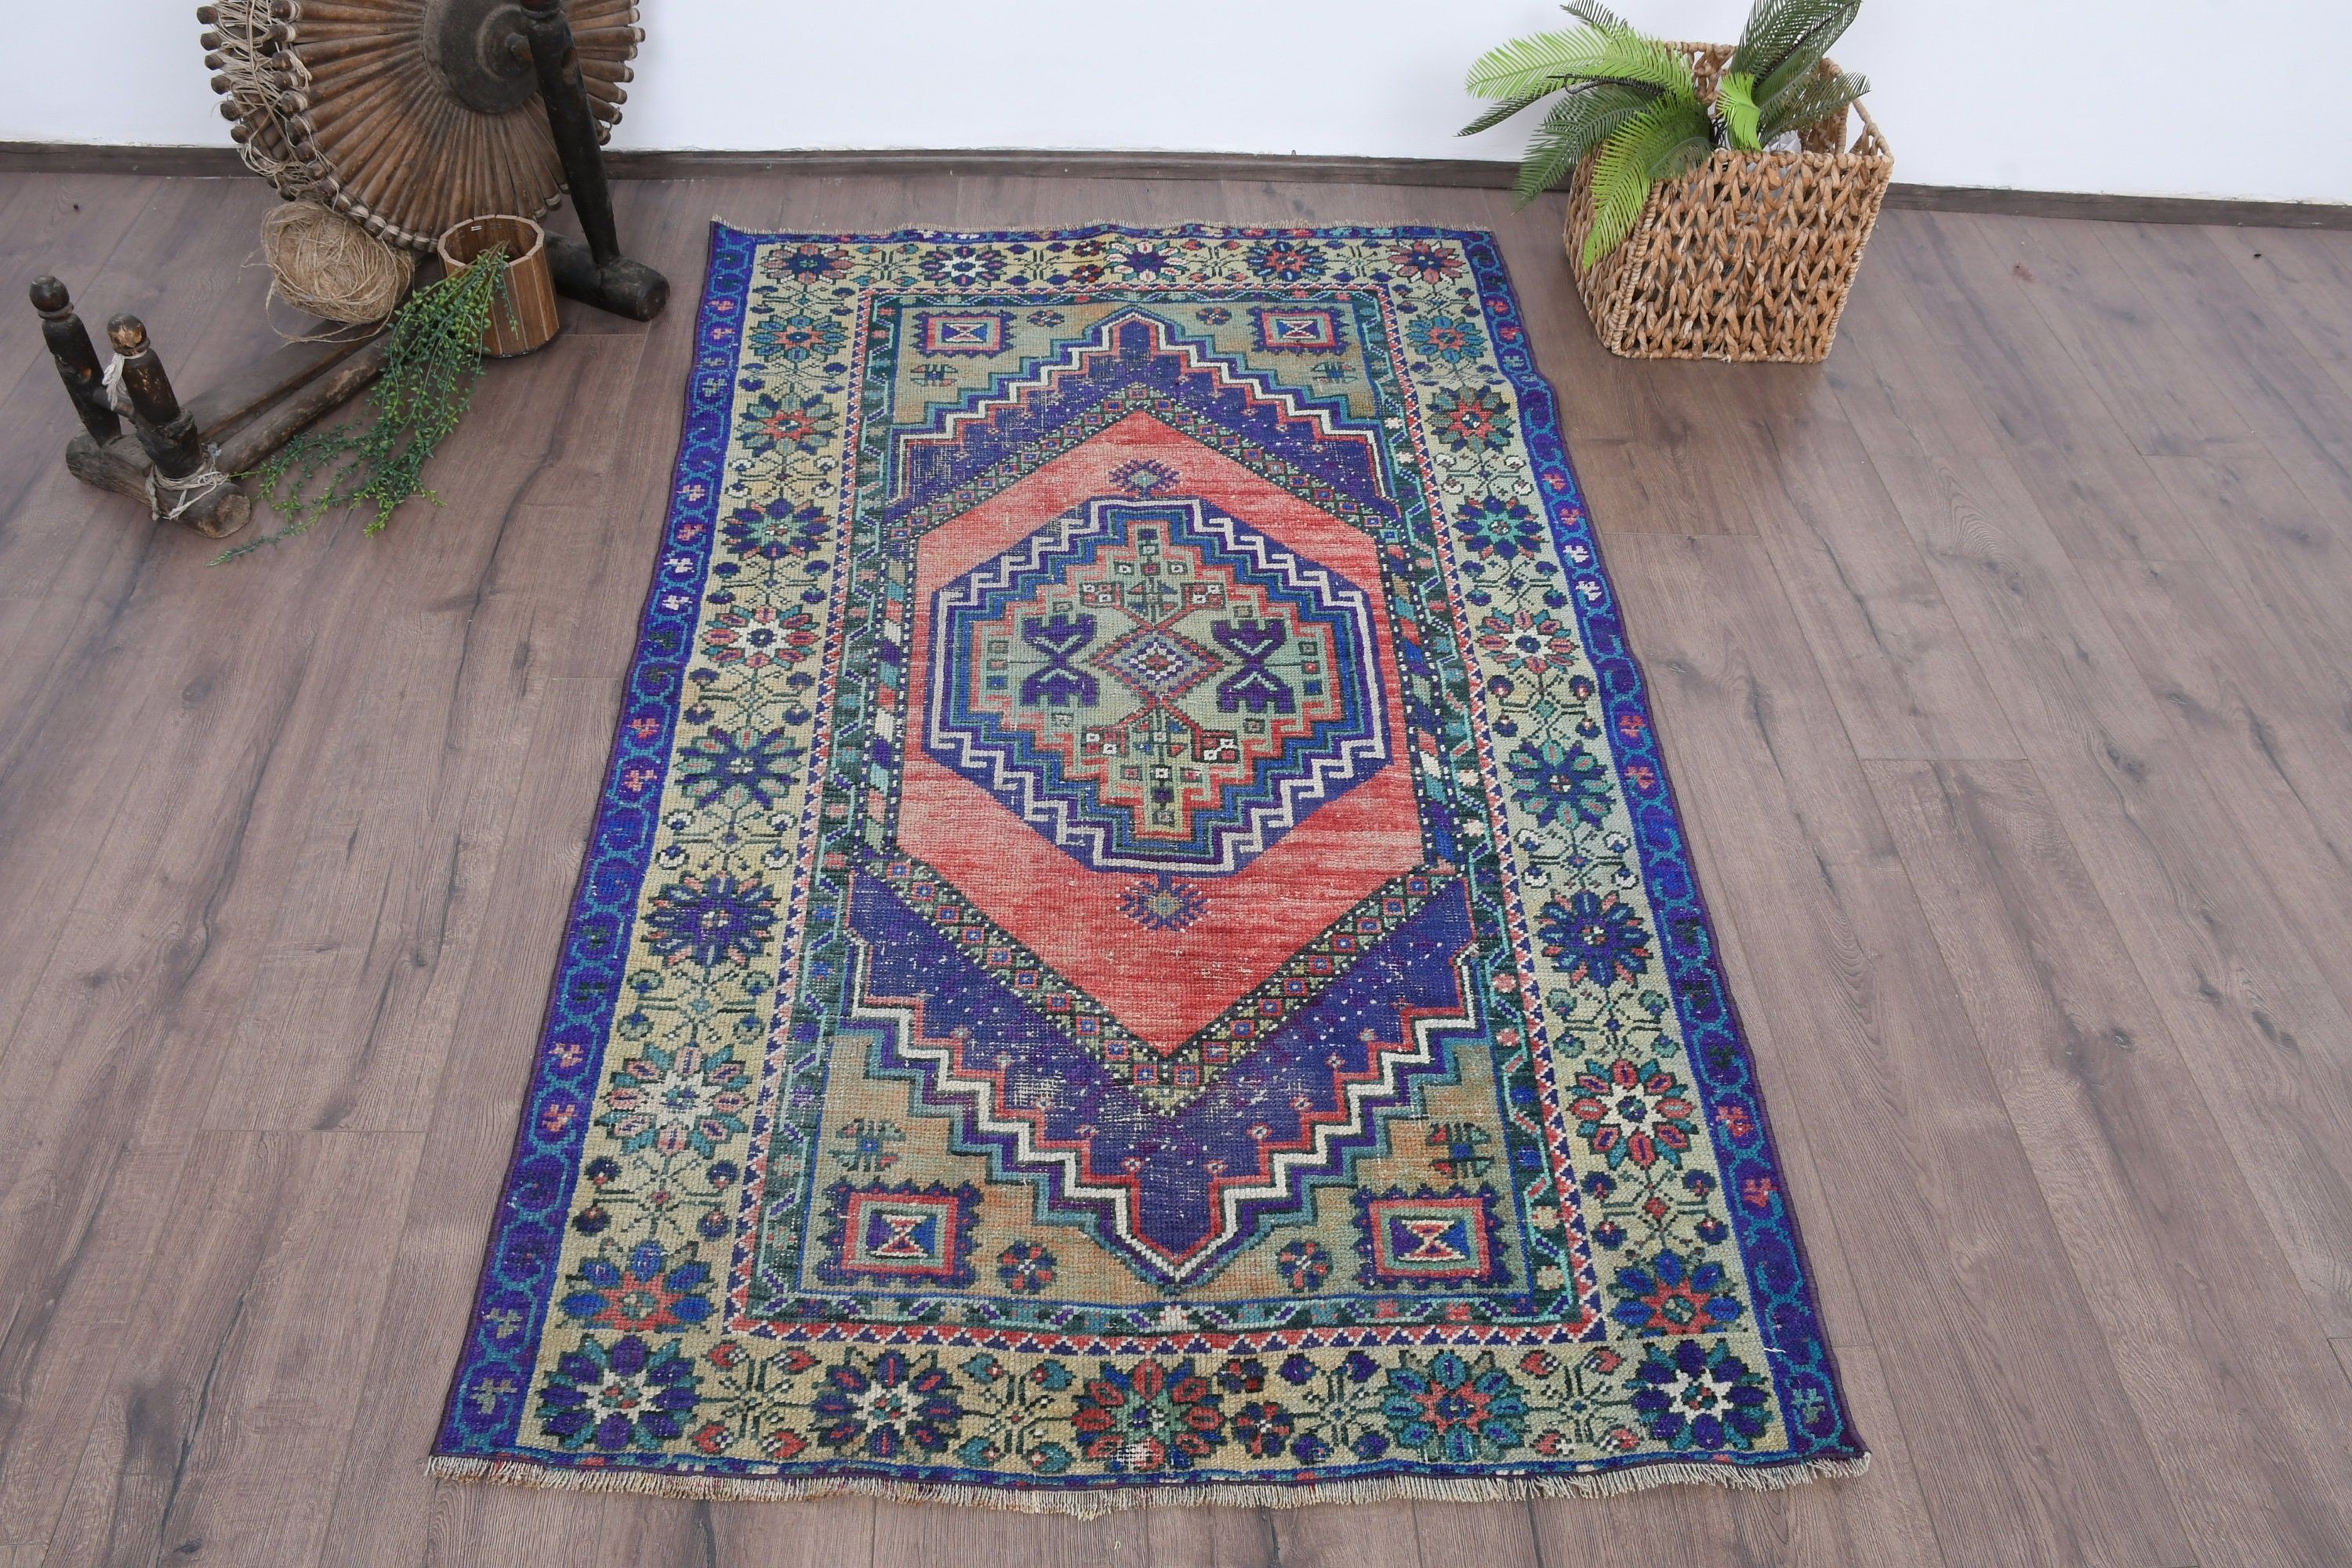 Rugs for Entry, Kitchen Rug, Vintage Rugs, Blue Antique Rugs, Entry Rug, Turkish Rug, 3.4x5.8 ft Accent Rugs, Cool Rug, Home Decor Rugs